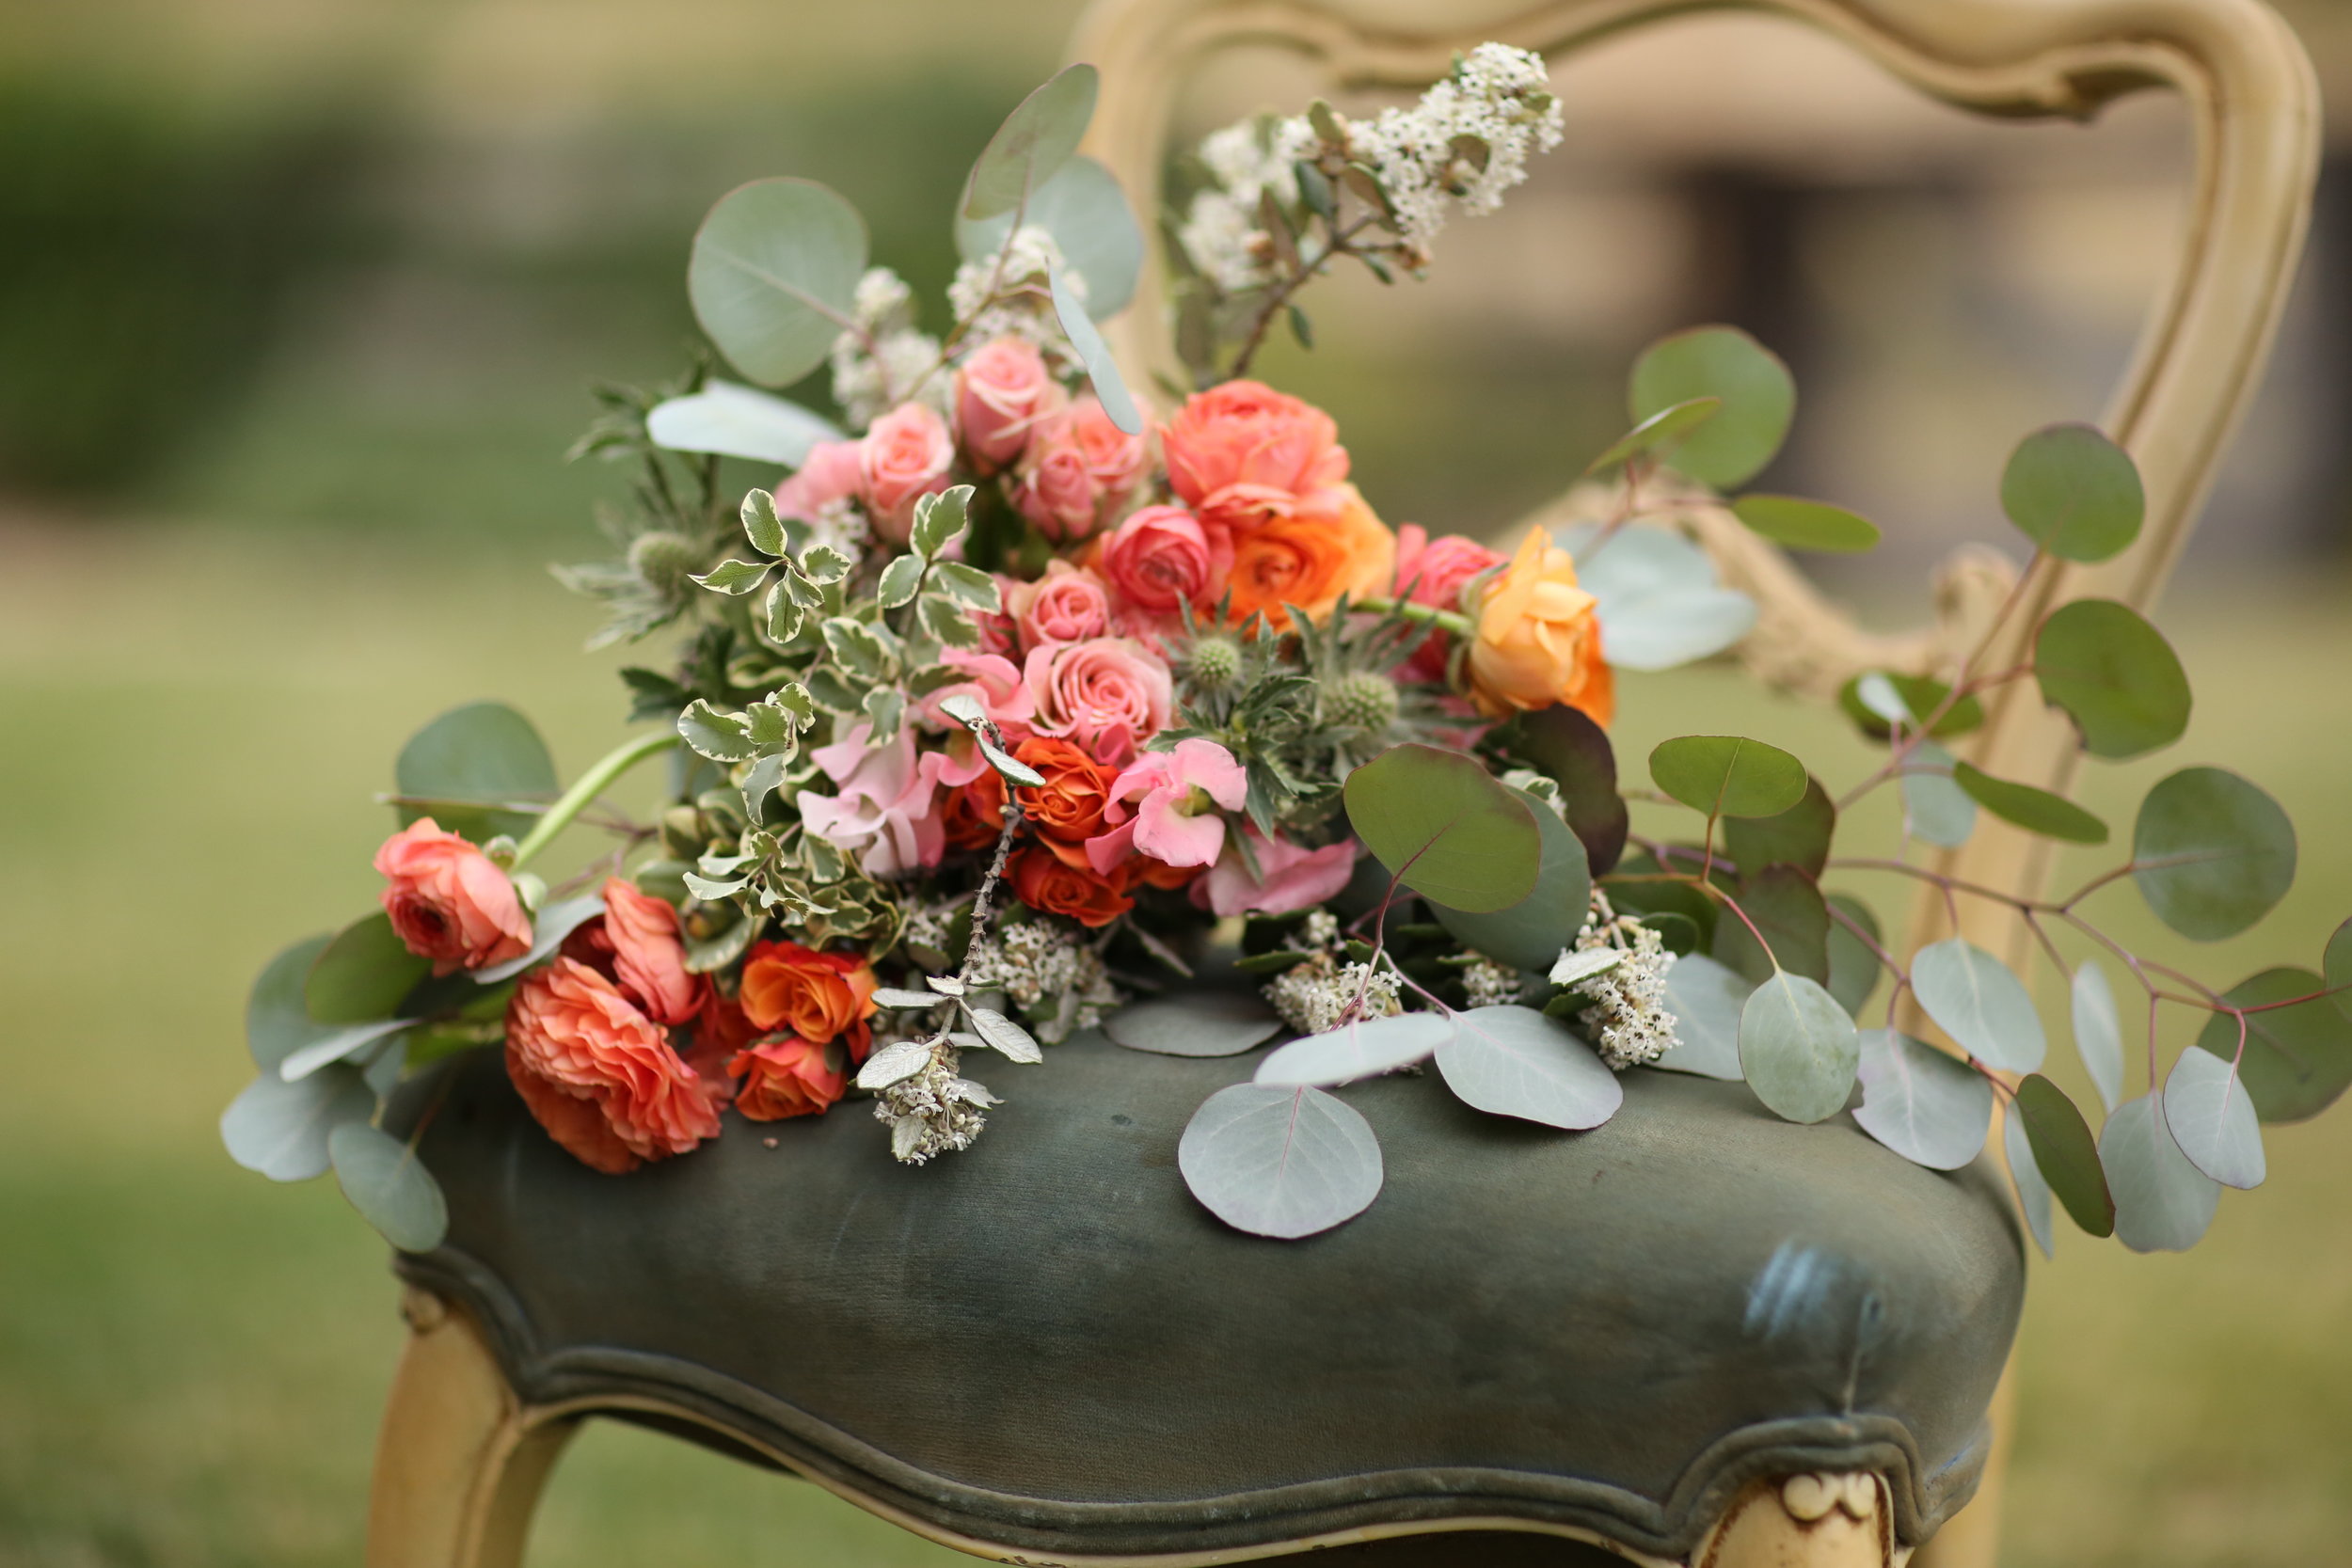 Bridal bouquet in chair